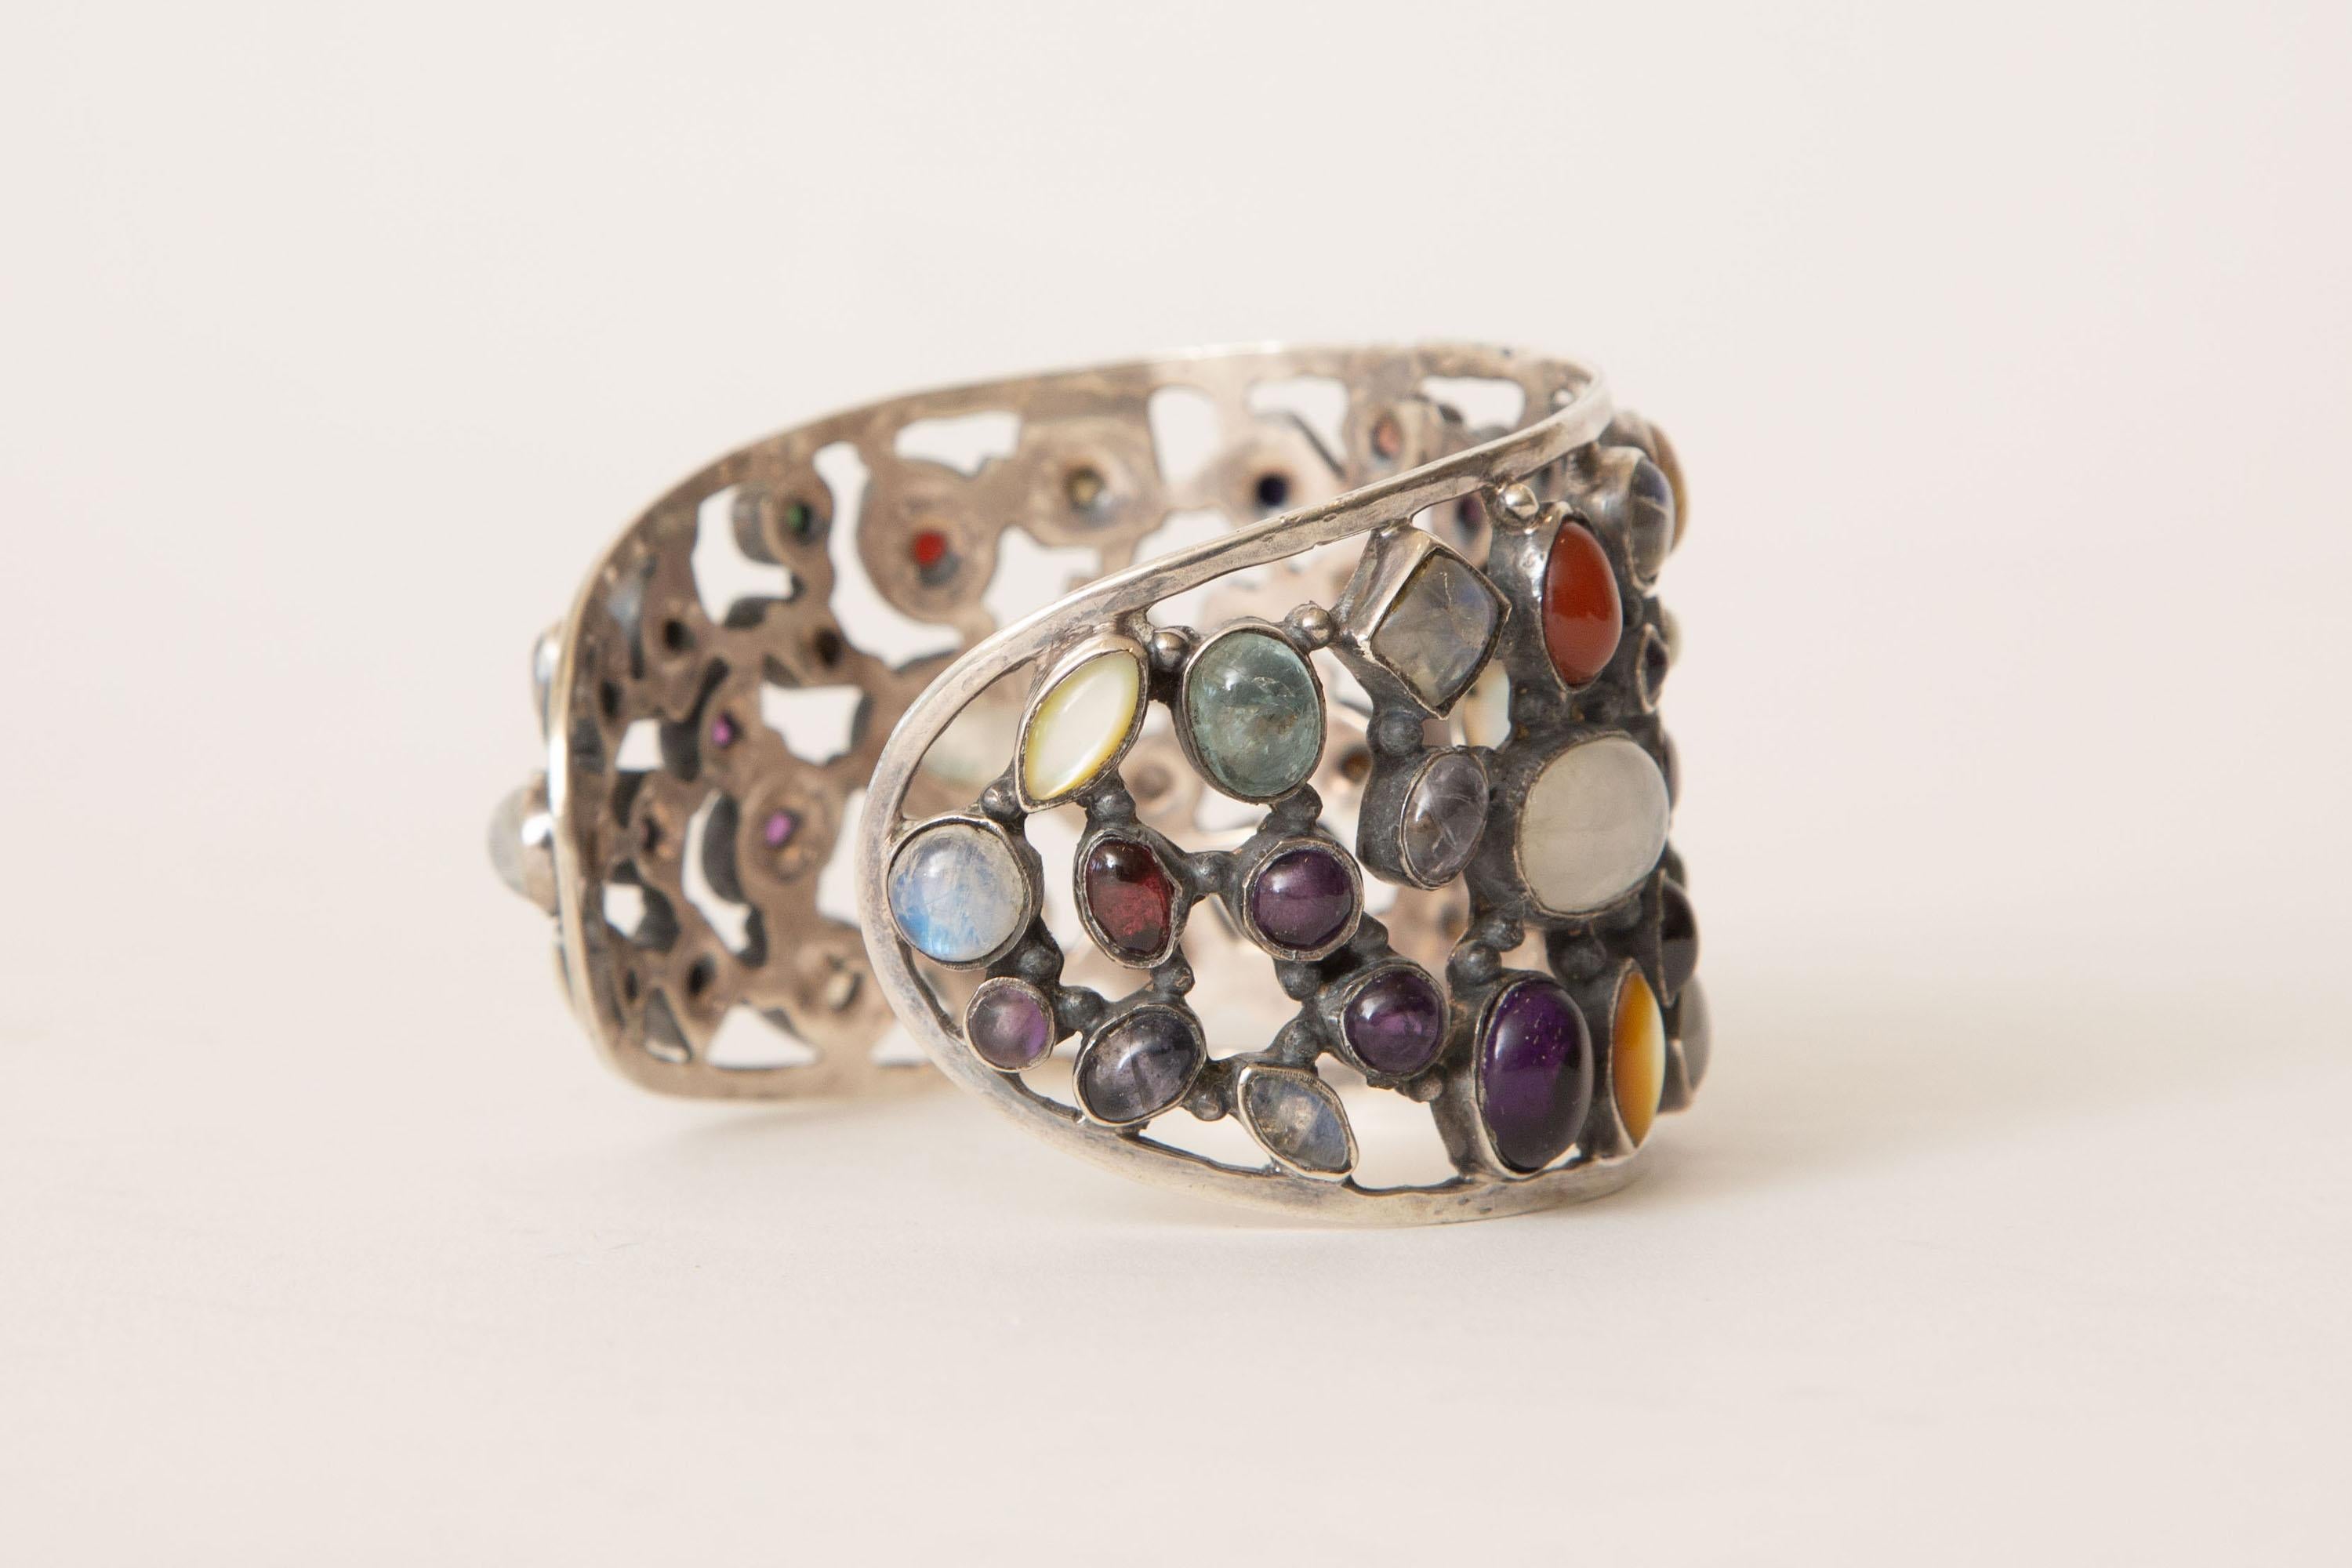 sterling silver cuff bracelet with stones